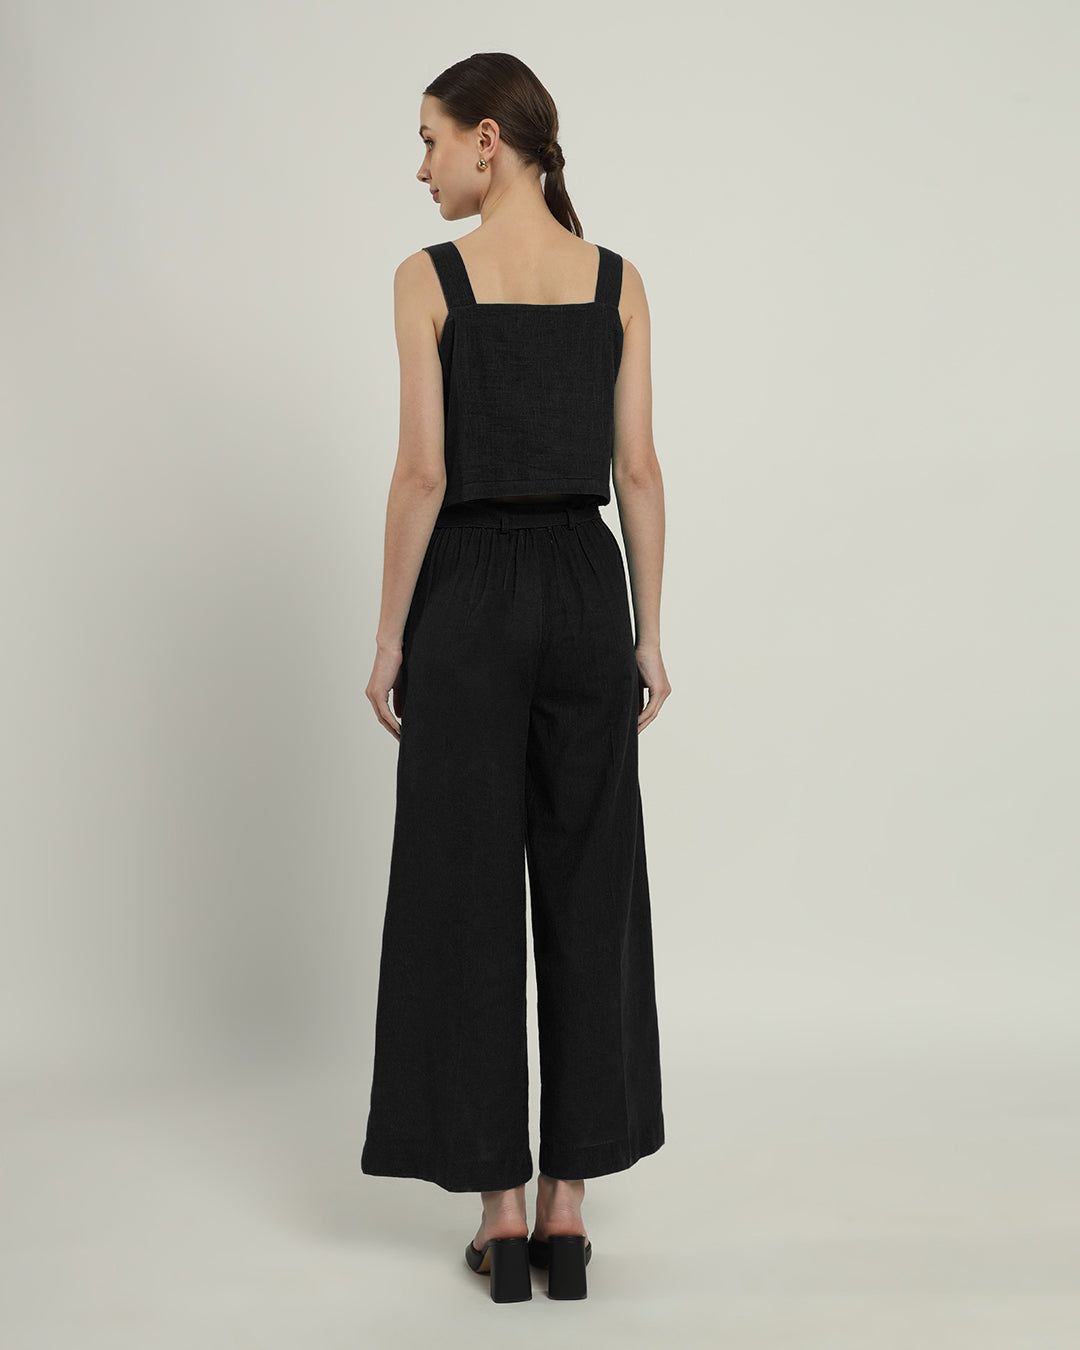 Noir Sleek Square Crop Solid Top (Without Bottoms)